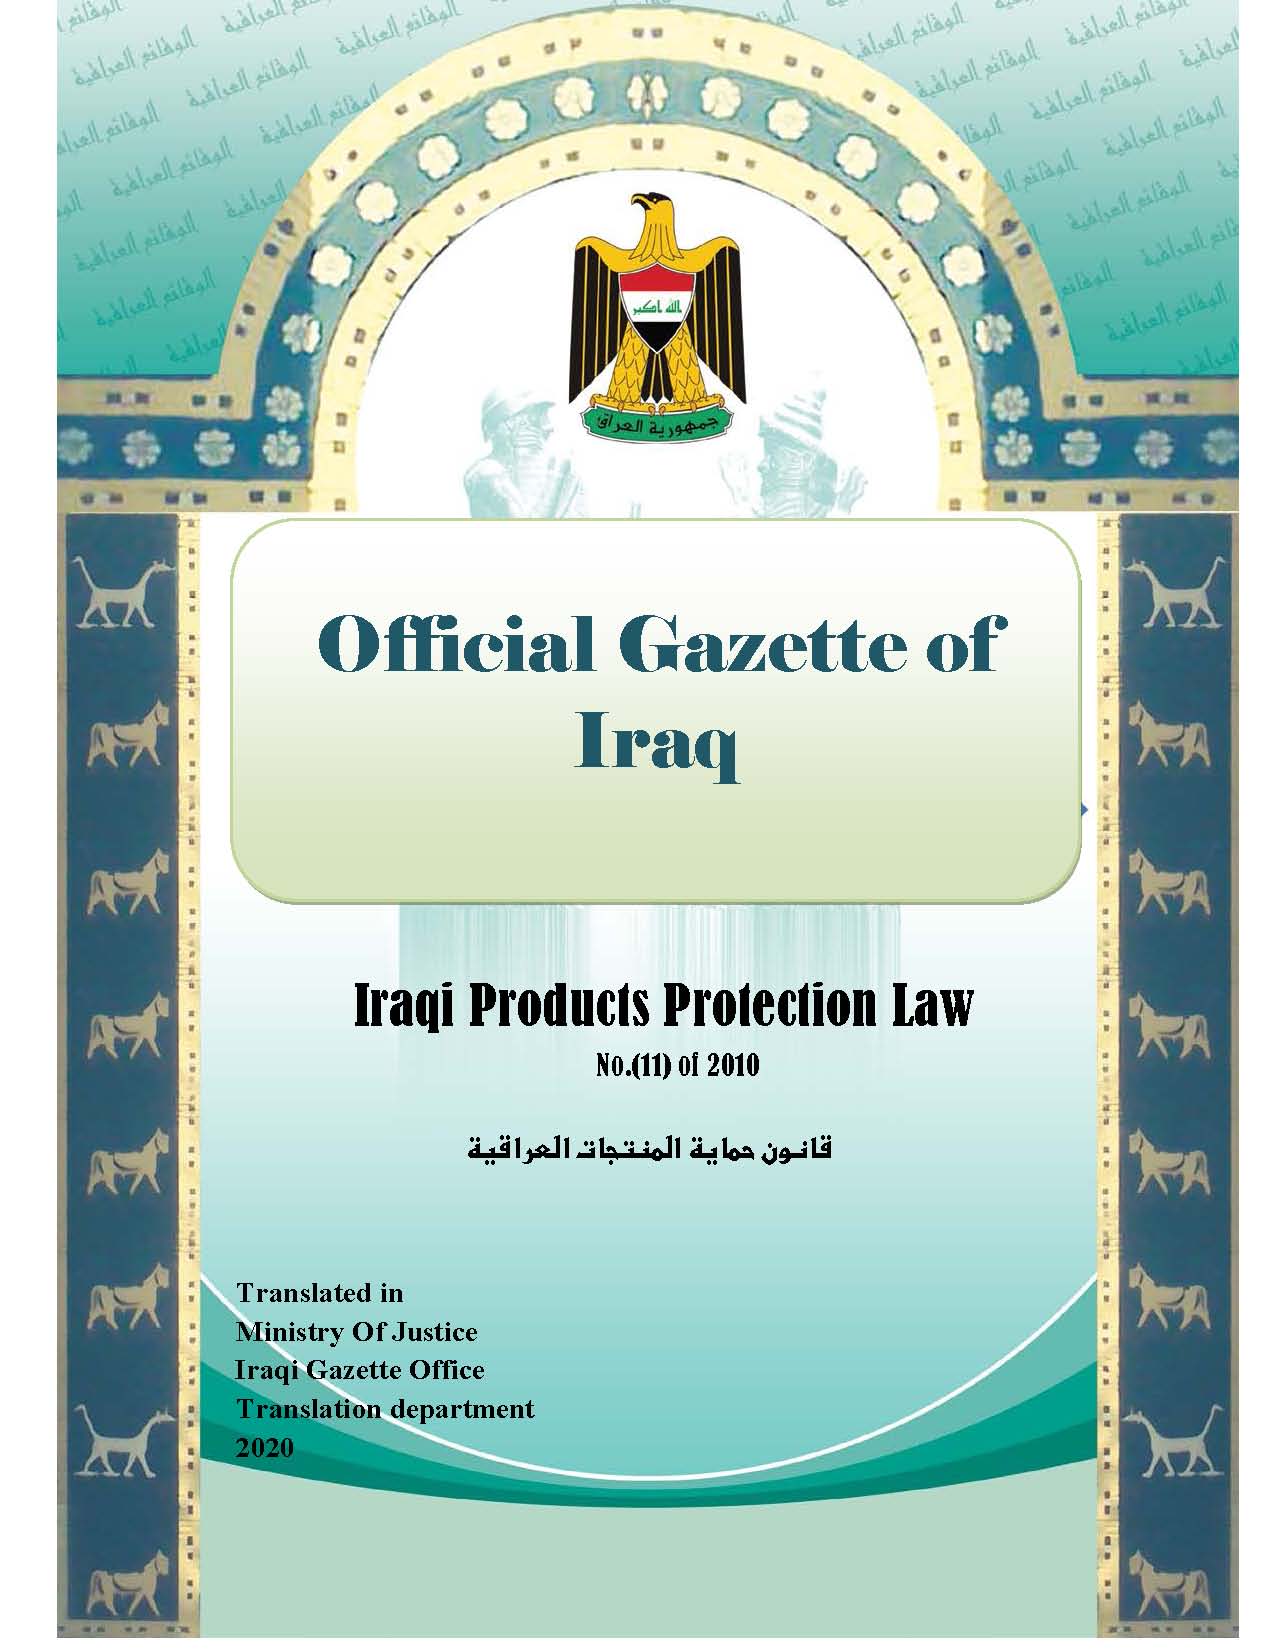 Iraqi Products Protection Law